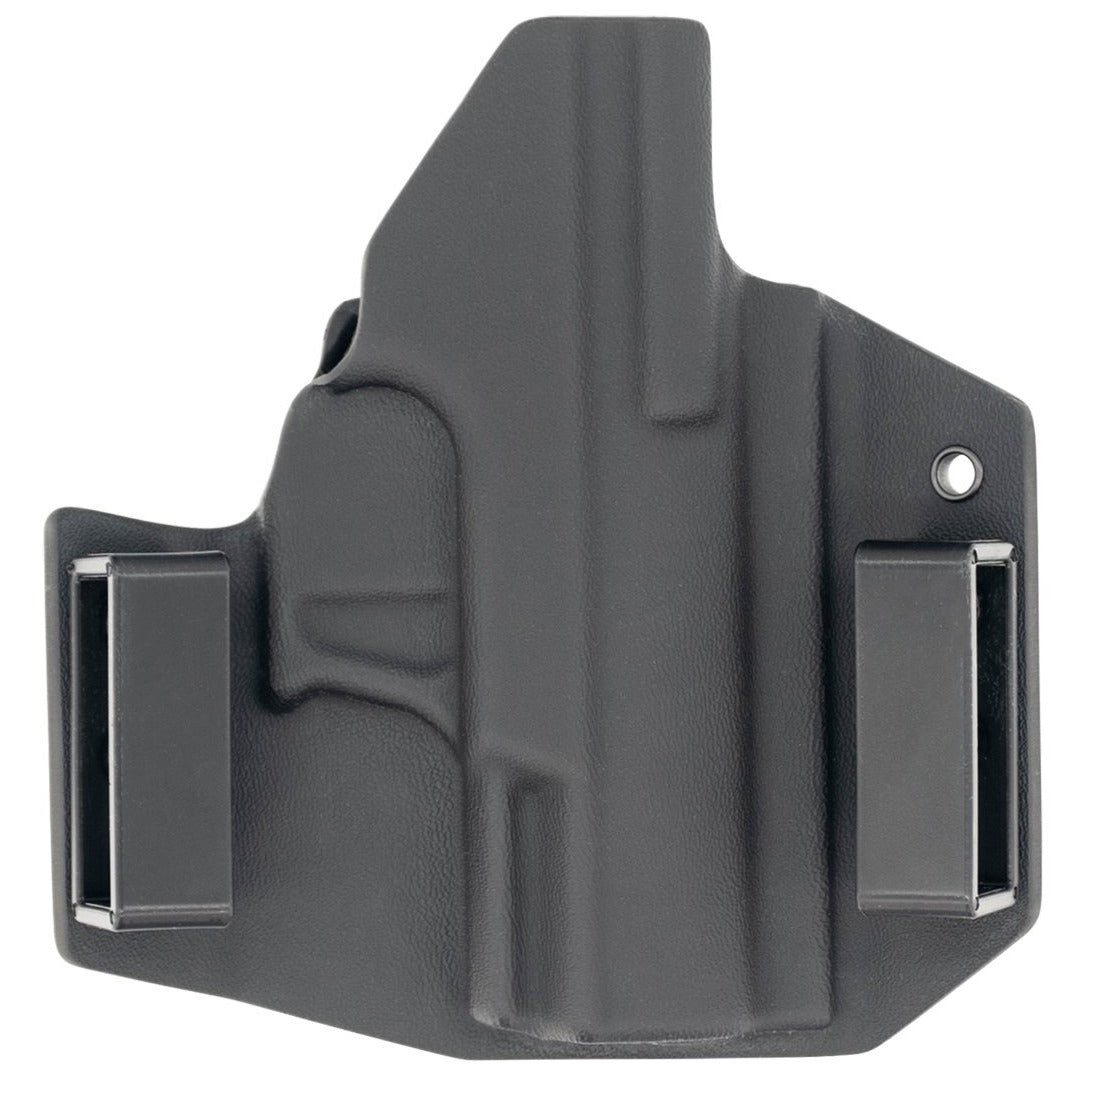 This is a C&G Holsters Covert series outside the waistband for the Walther PK380 (rear view) in right hand.